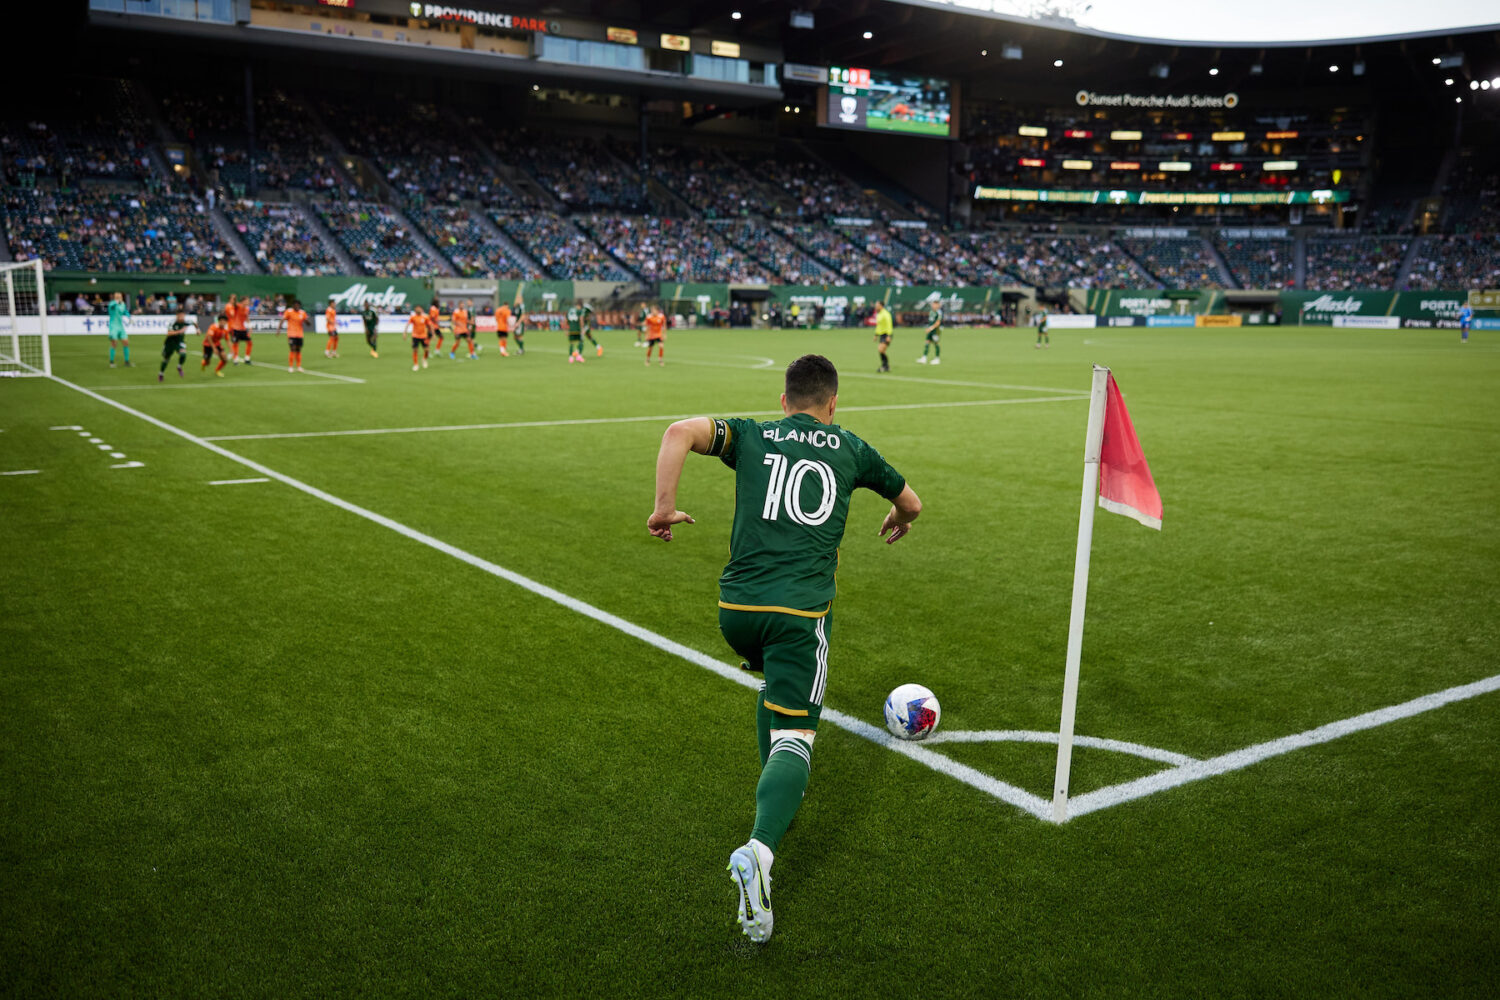 April 26 2023; Portland, OR, USA; Timbers vs Orange County SC in the US Open Cup at Providence Park. Photo: Craig Mitchelldyer-Portland Timbers